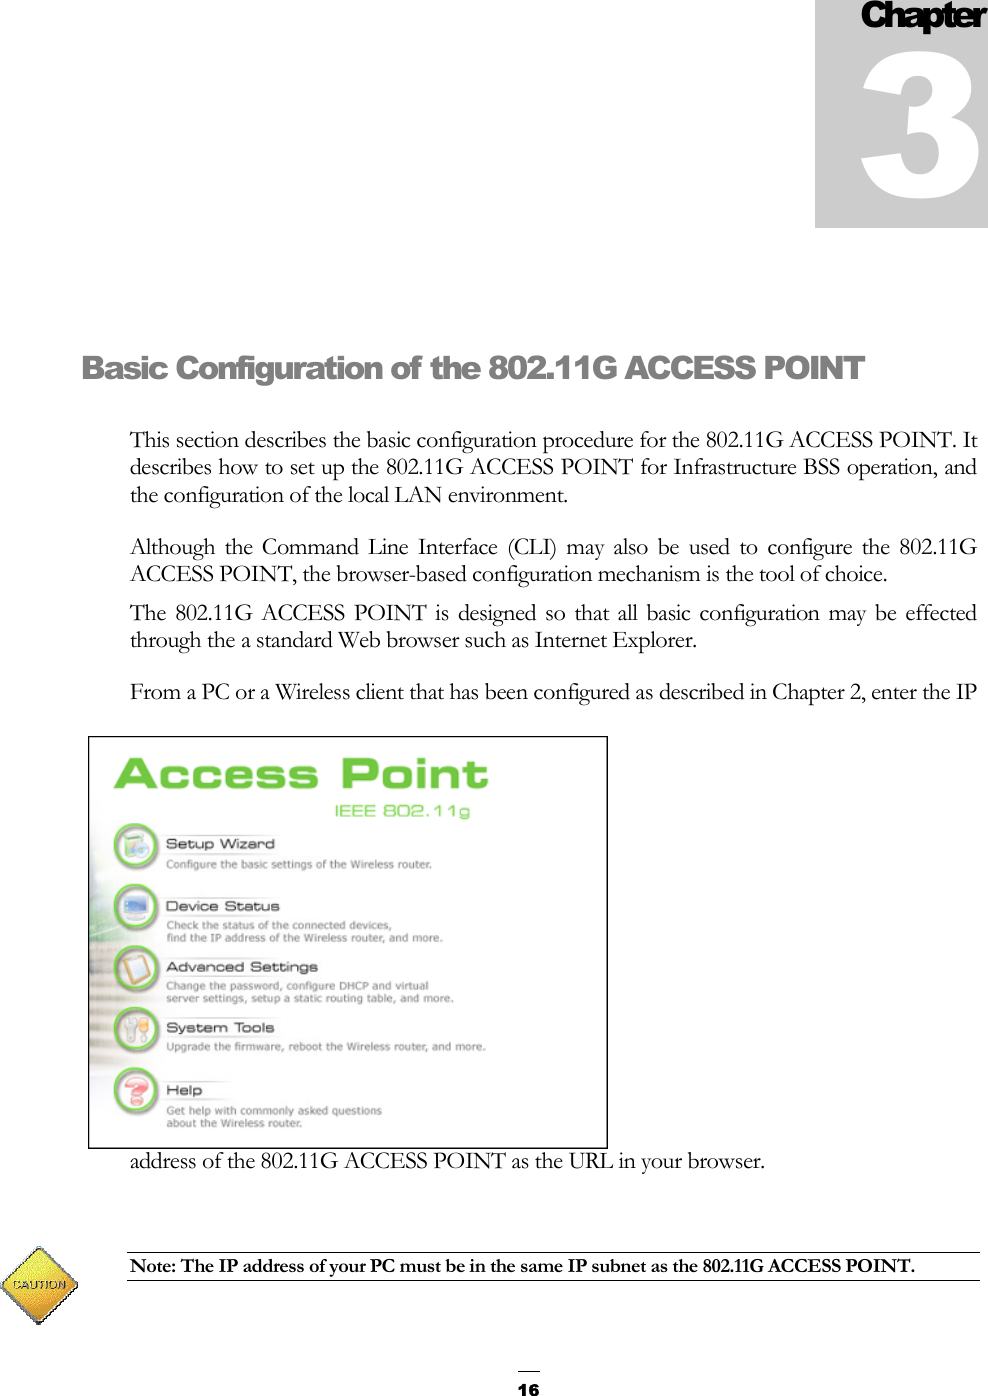   16Basic Configuration of the 802.11G ACCESS POINT This section describes the basic configuration procedure for the 802.11G ACCESS POINT. It describes how to set up the 802.11G ACCESS POINT for Infrastructure BSS operation, and the configuration of the local LAN environment. Although the Command Line Interface (CLI) may also be used to configure the 802.11G ACCESS POINT, the browser-based configuration mechanism is the tool of choice.  The 802.11G ACCESS POINT is designed so that all basic configuration may be effected through the a standard Web browser such as Internet Explorer. From a PC or a Wireless client that has been configured as described in Chapter 2, enter the IP address of the 802.11G ACCESS POINT as the URL in your browser.  Note: The IP address of your PC must be in the same IP subnet as the 802.11G ACCESS POINT.  Chapter 3 